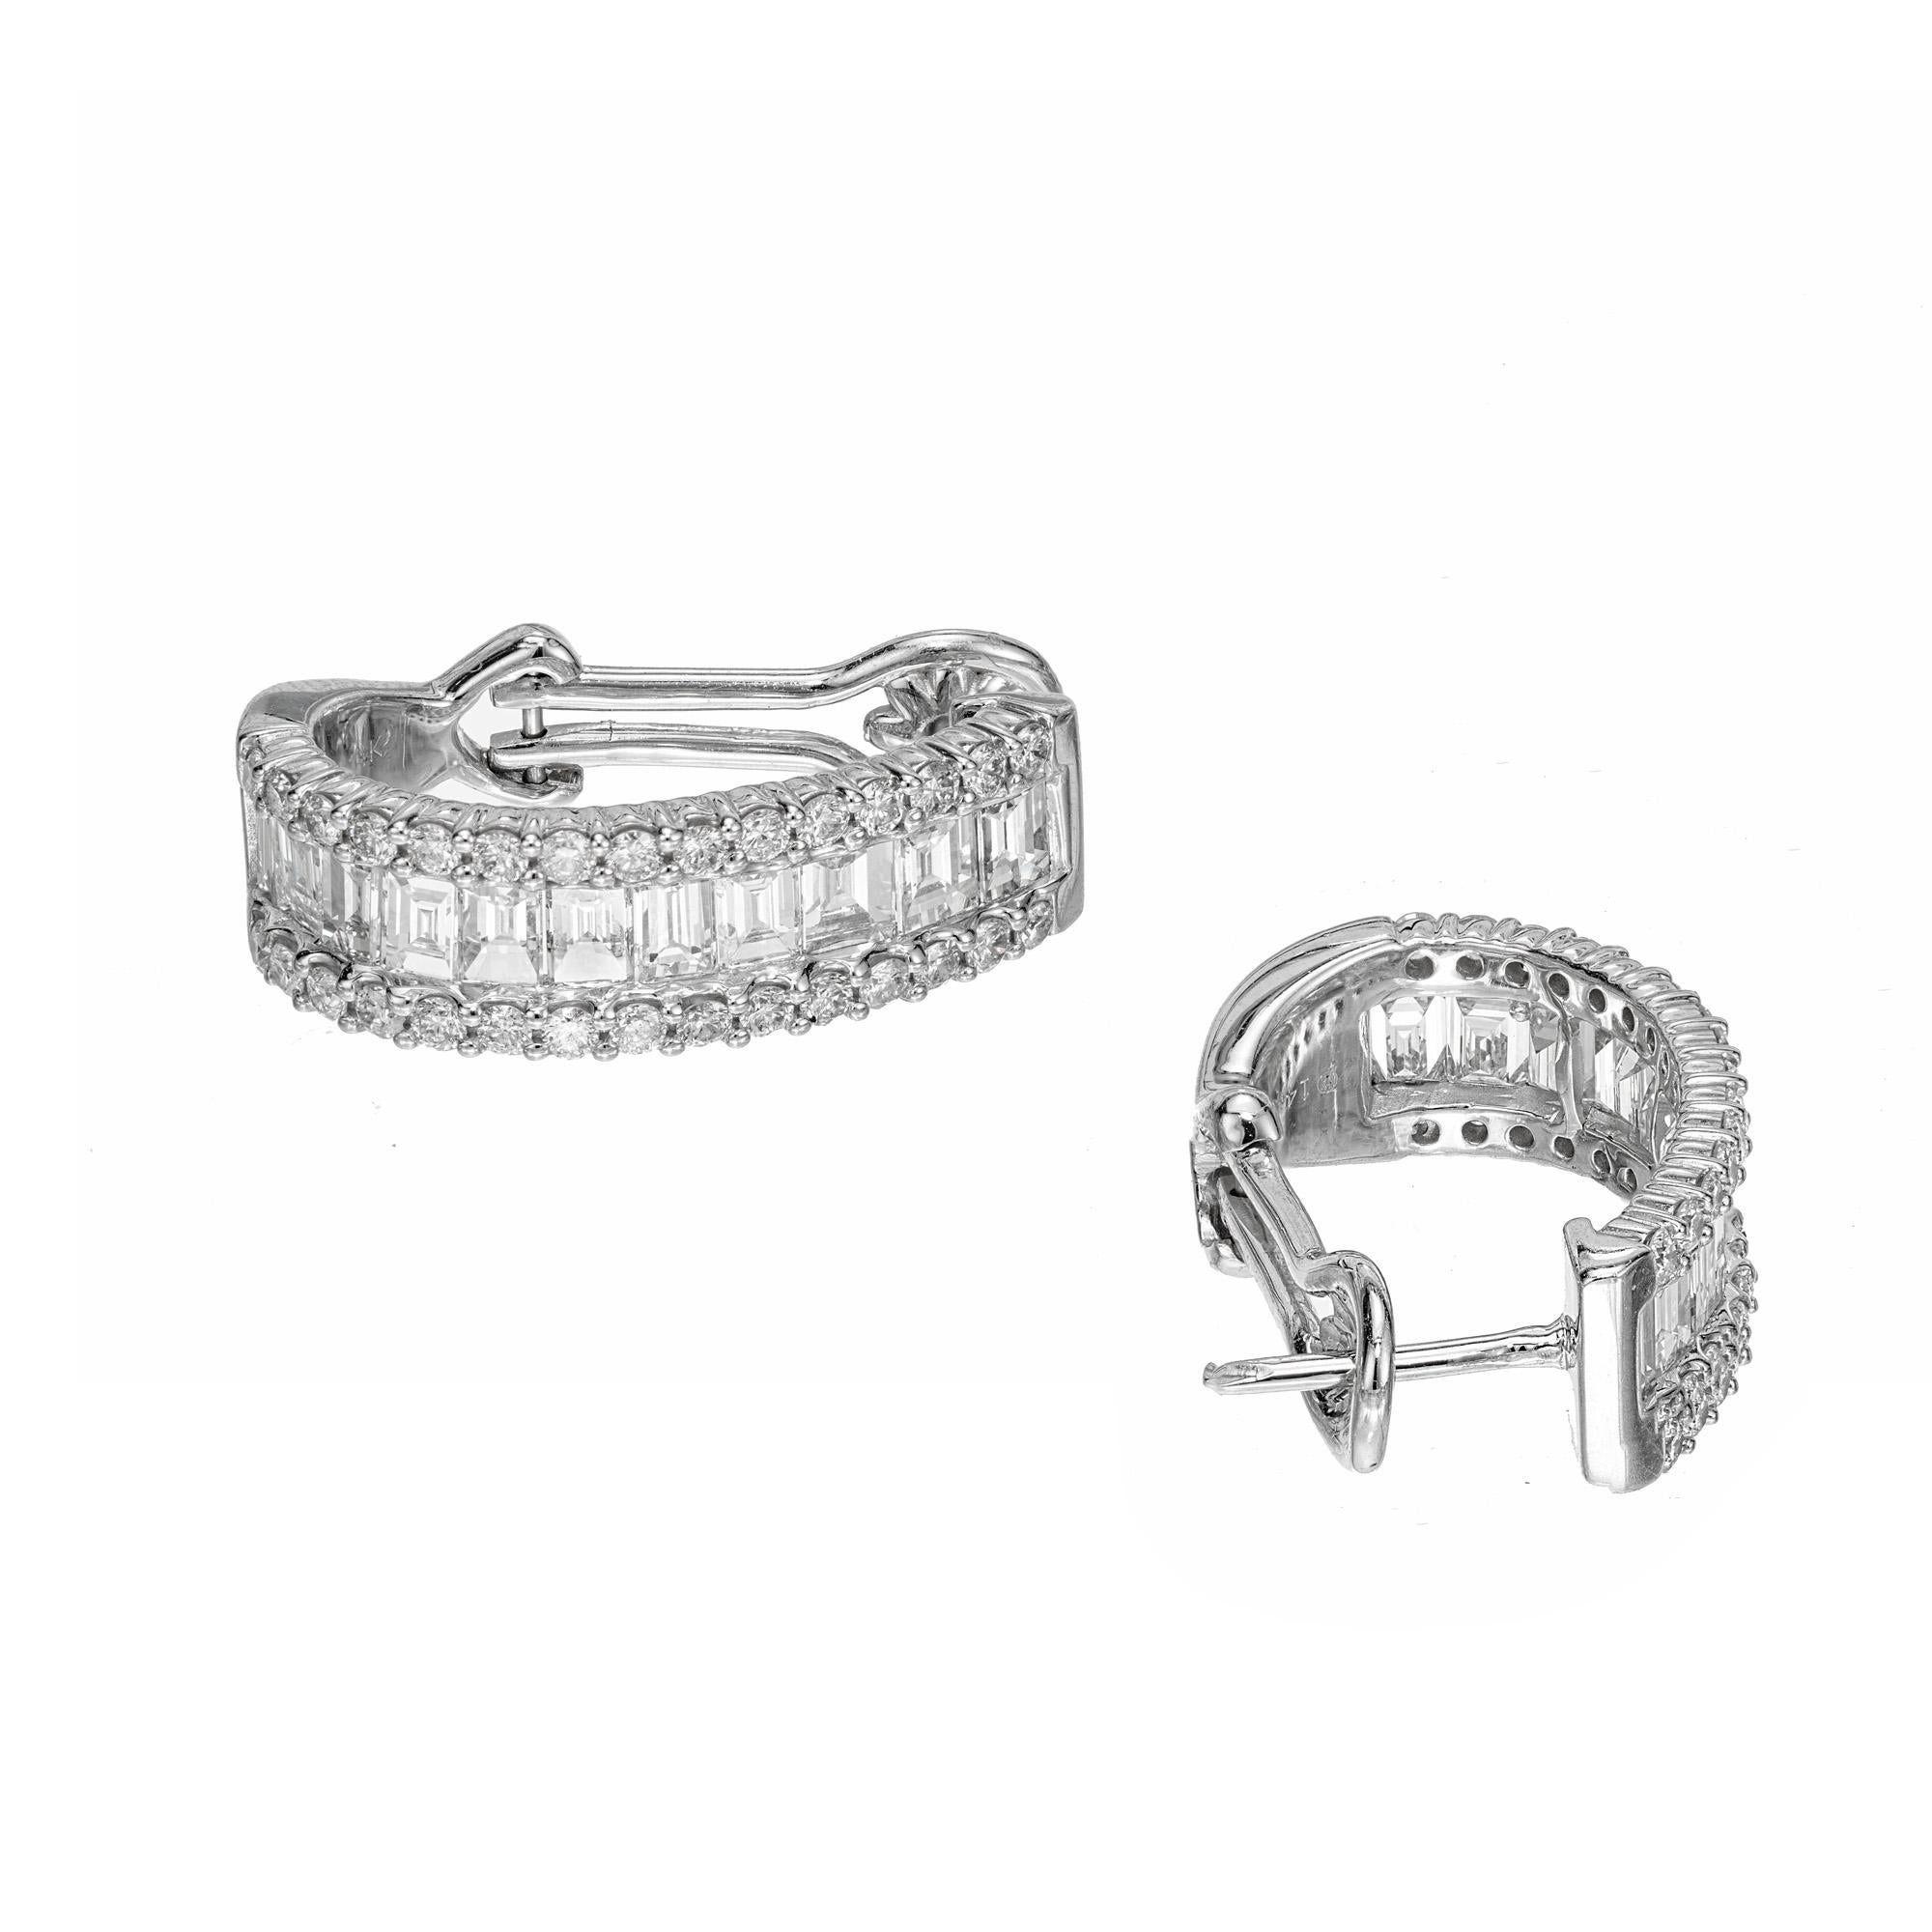 3.30 Carat Diamond White Gold Hoop Earrings In Good Condition For Sale In Stamford, CT